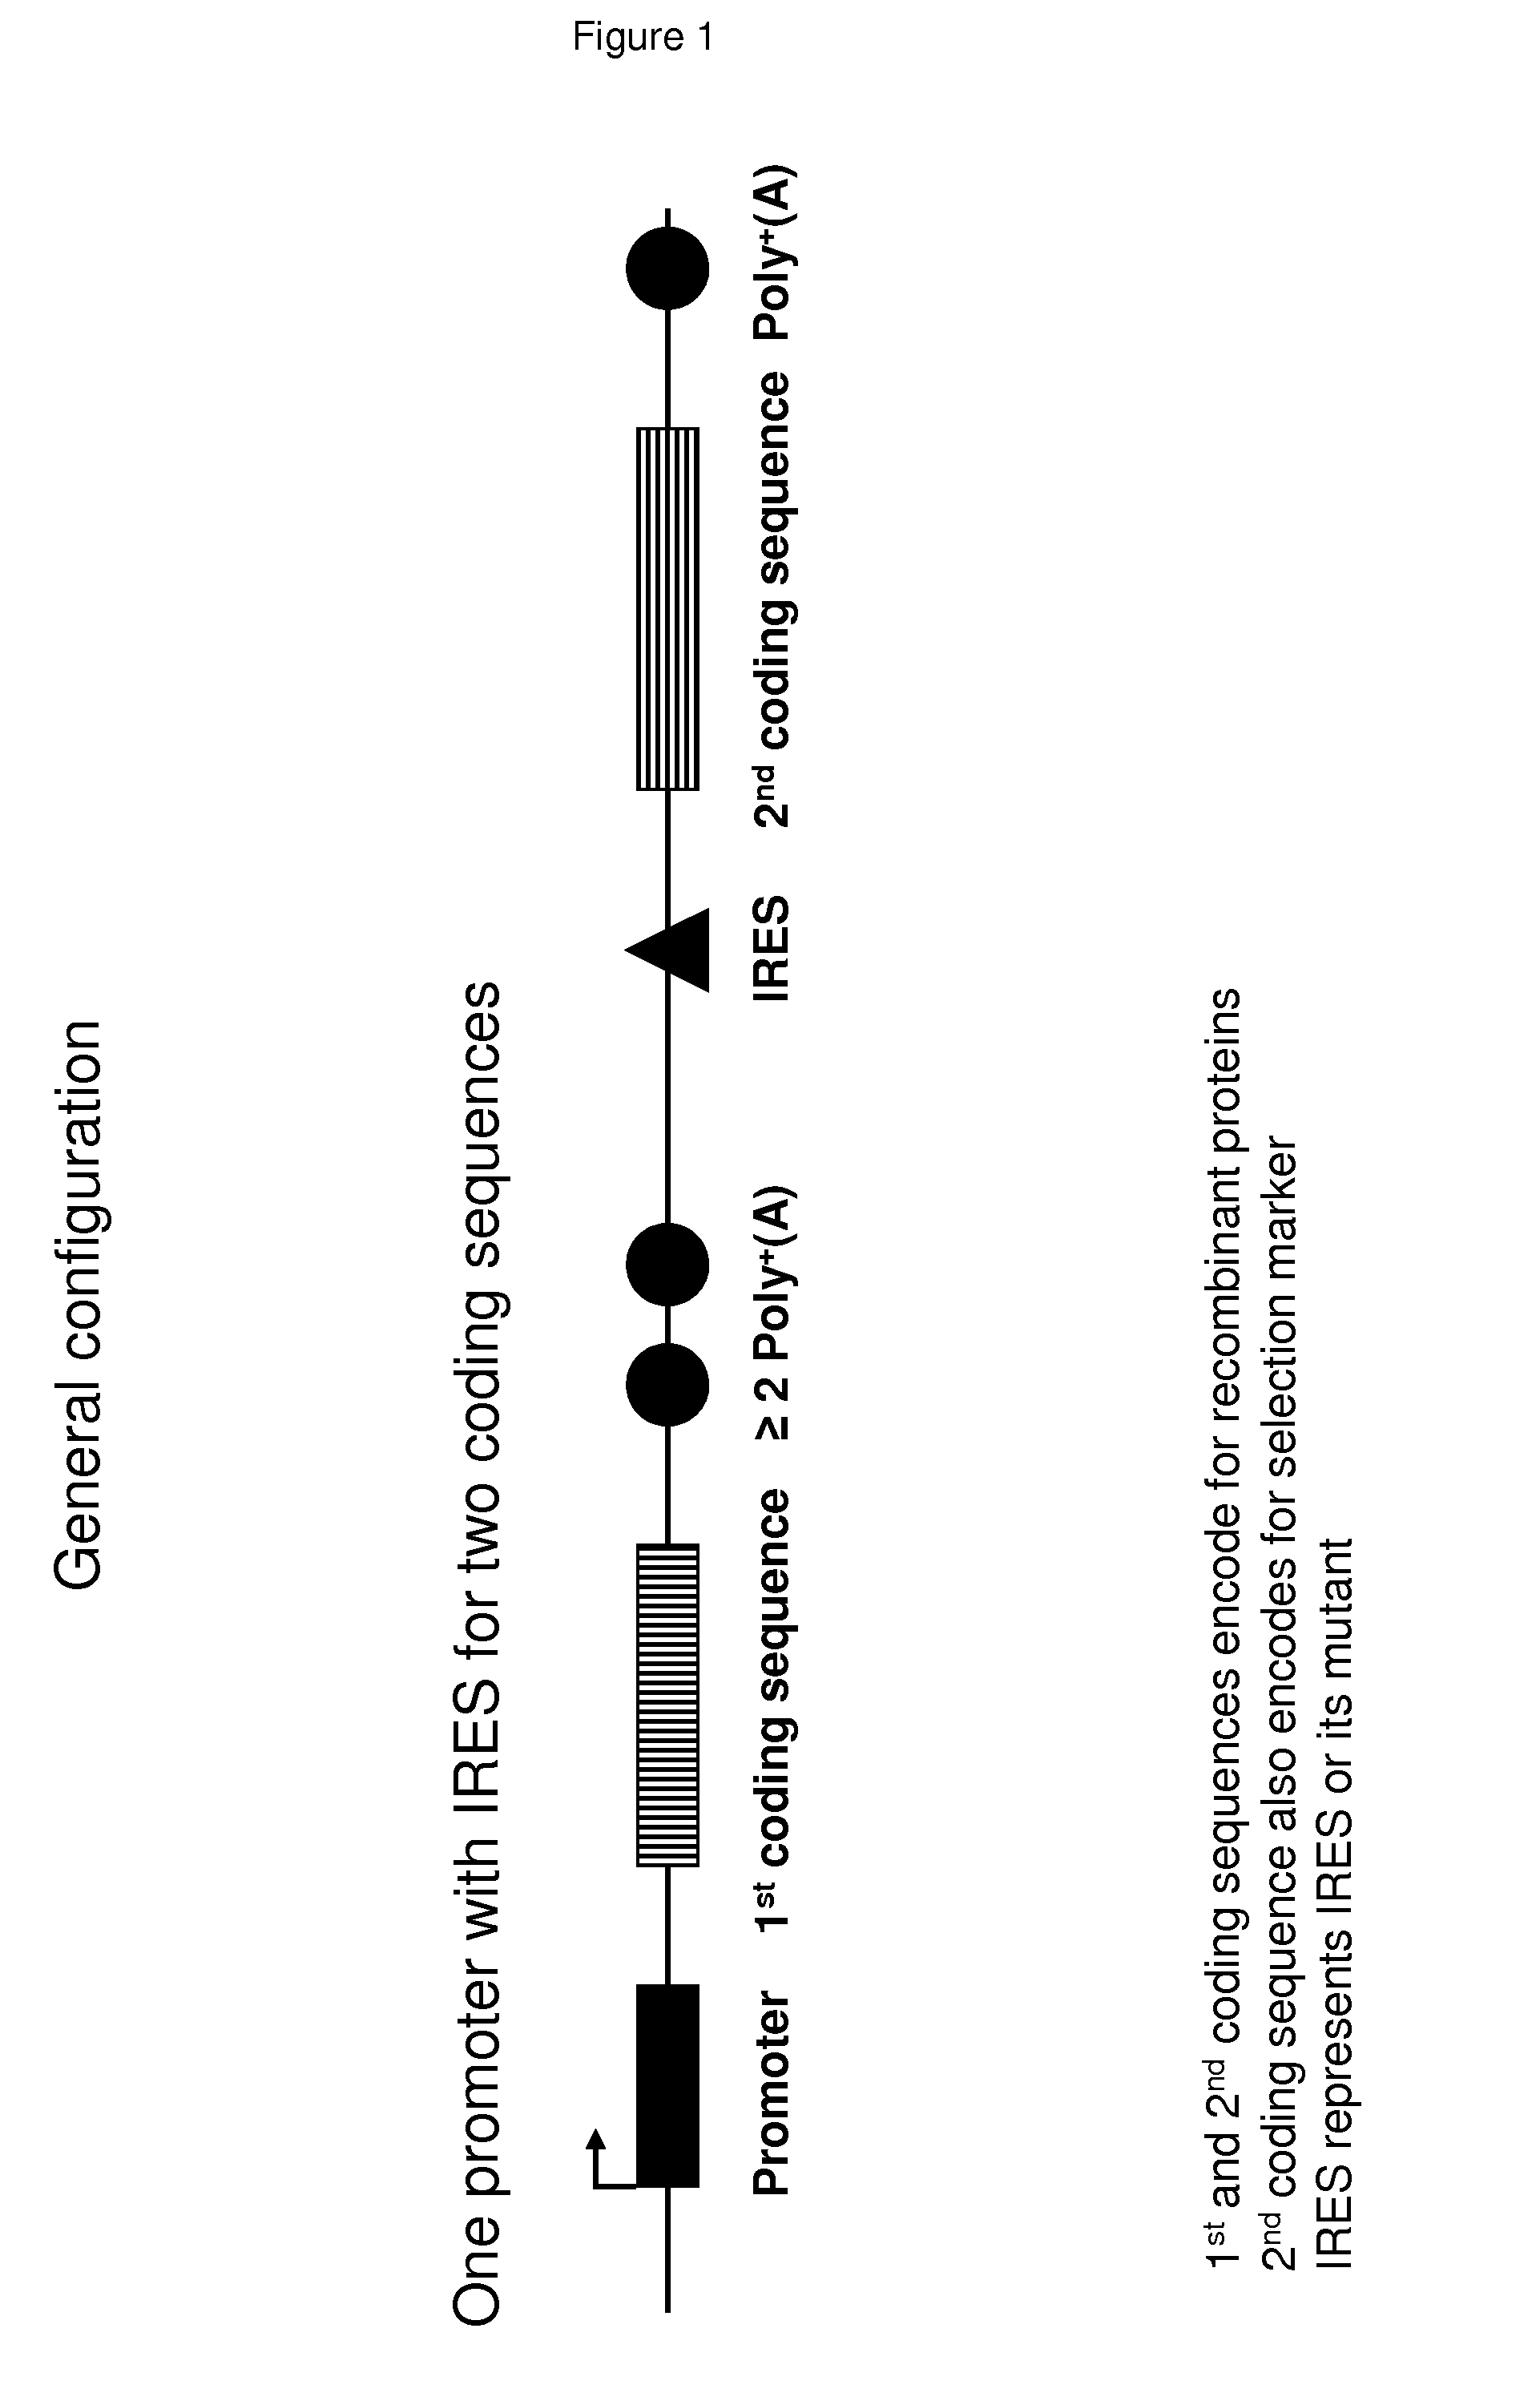 Vectors and methods for recombinant protein expression